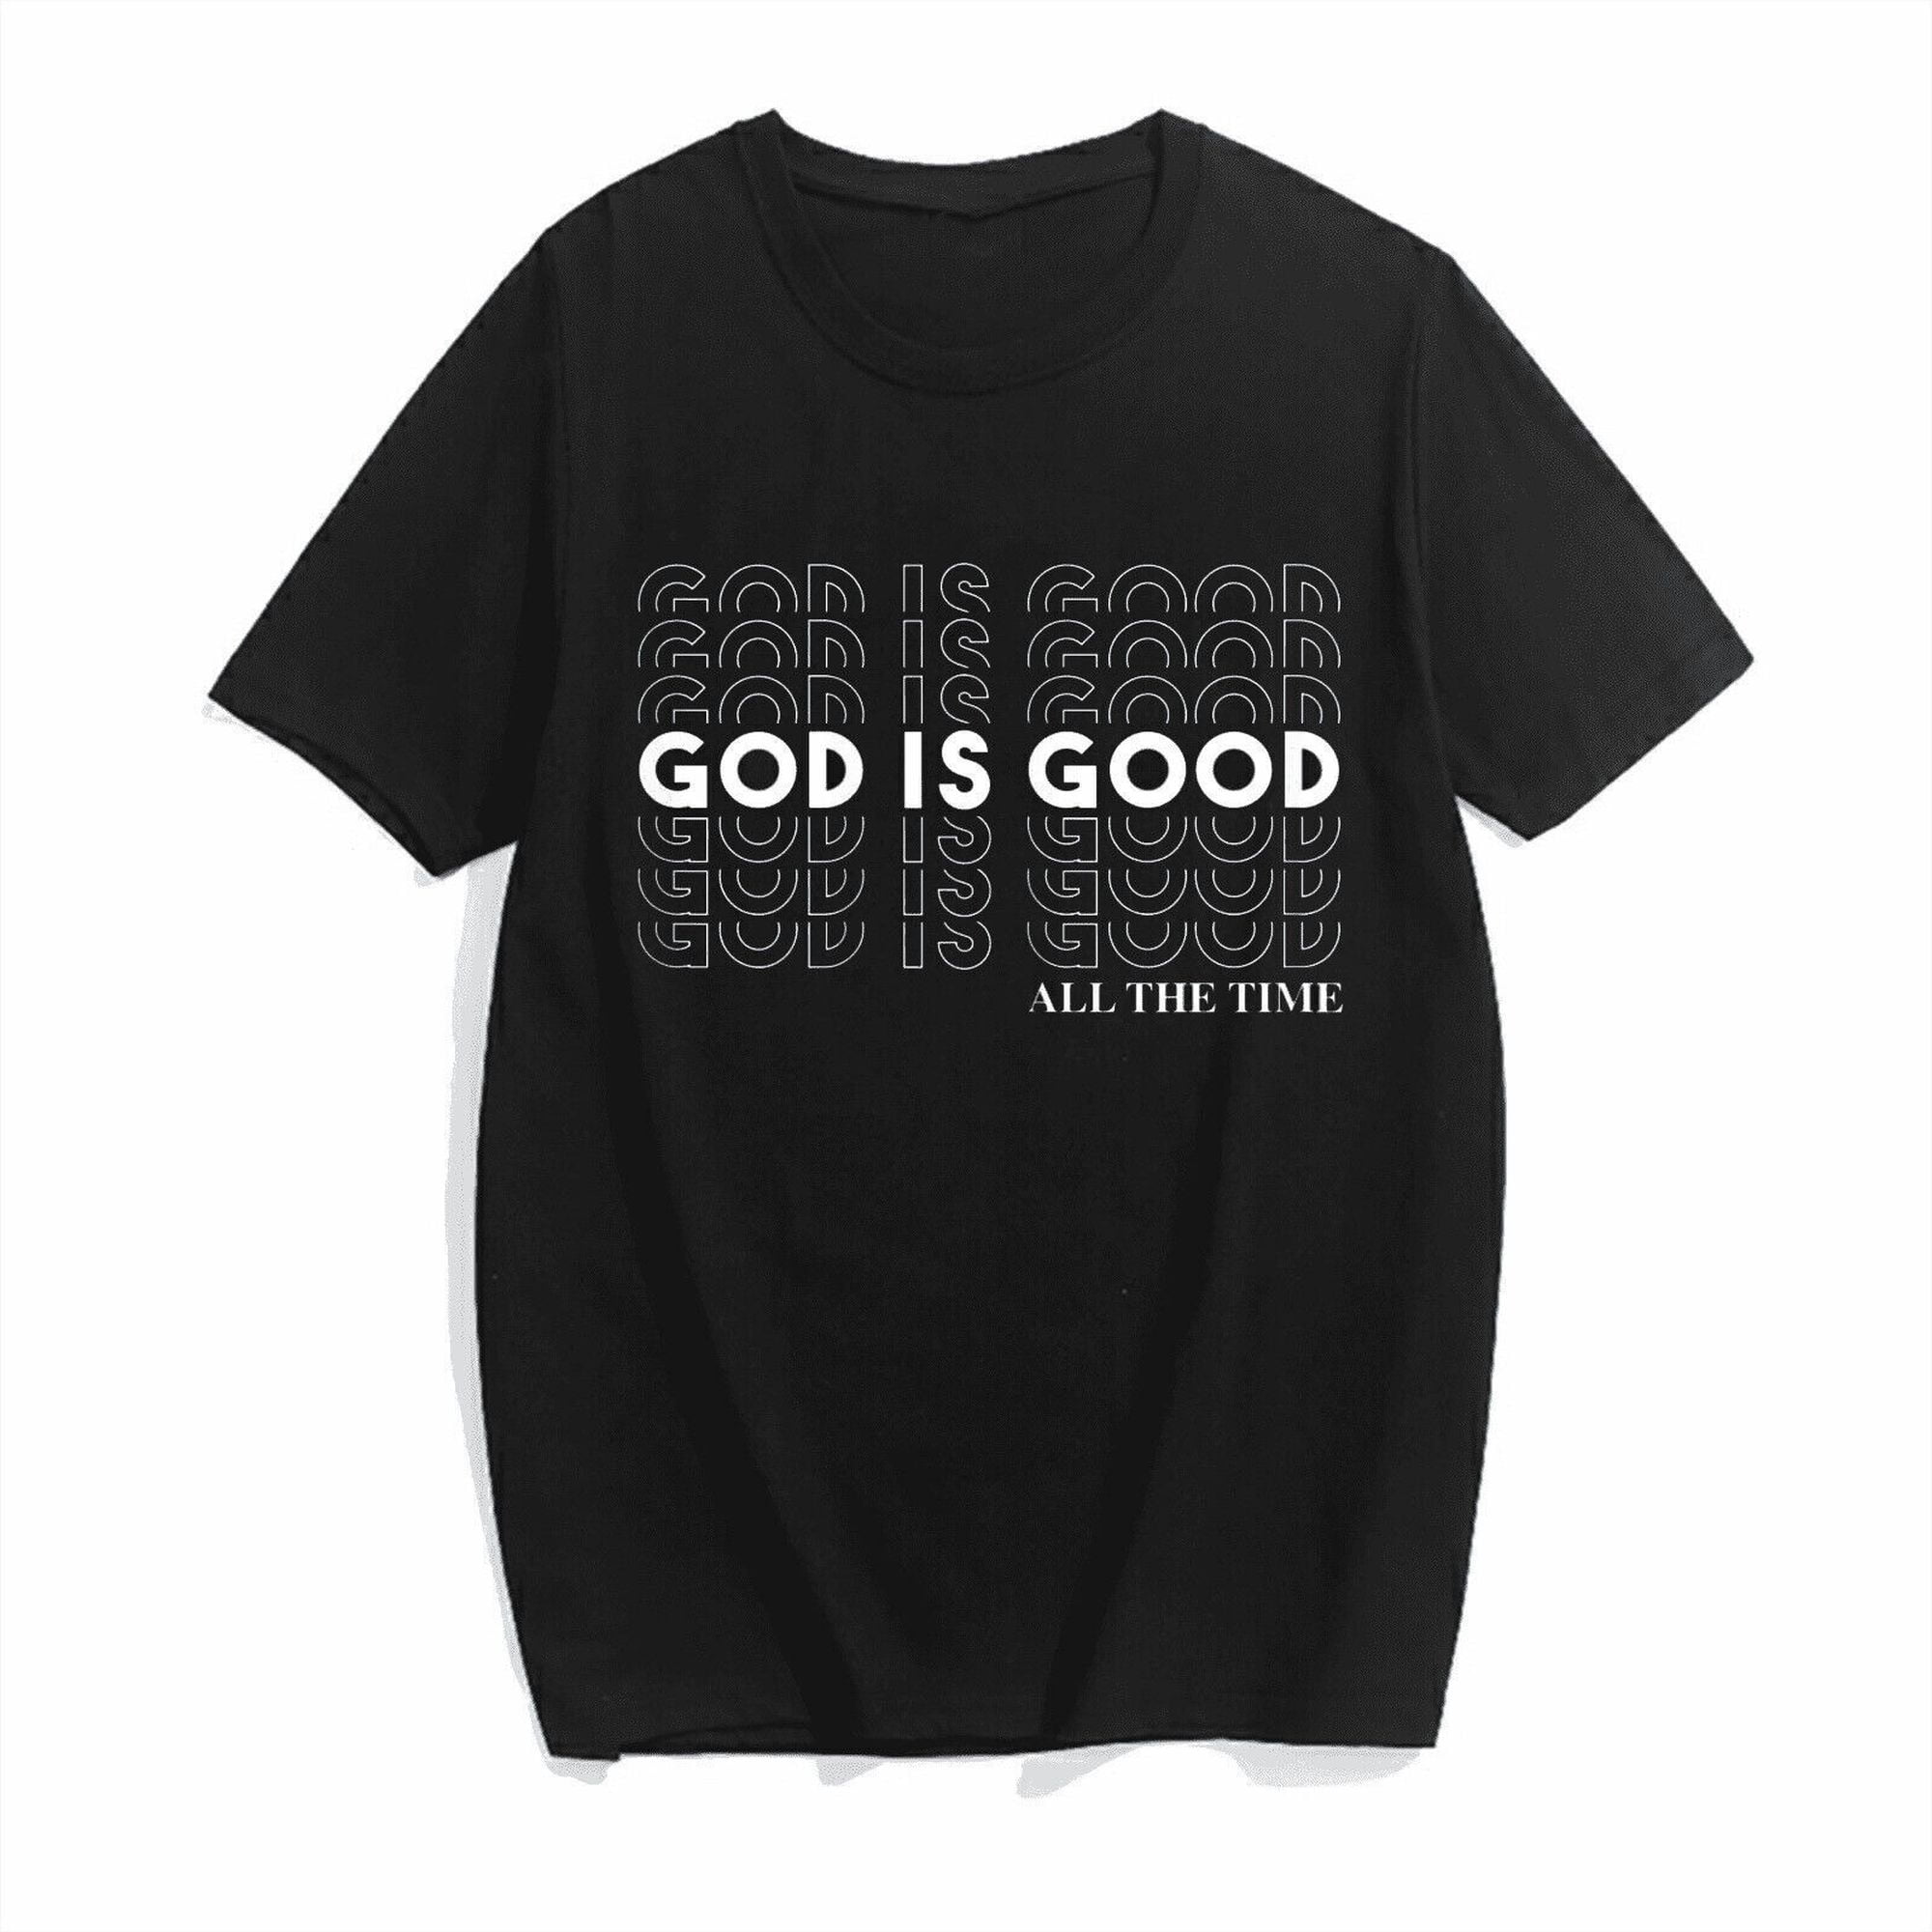 God Is Good All The Time: Women's Christian Worship T-shirt for ...